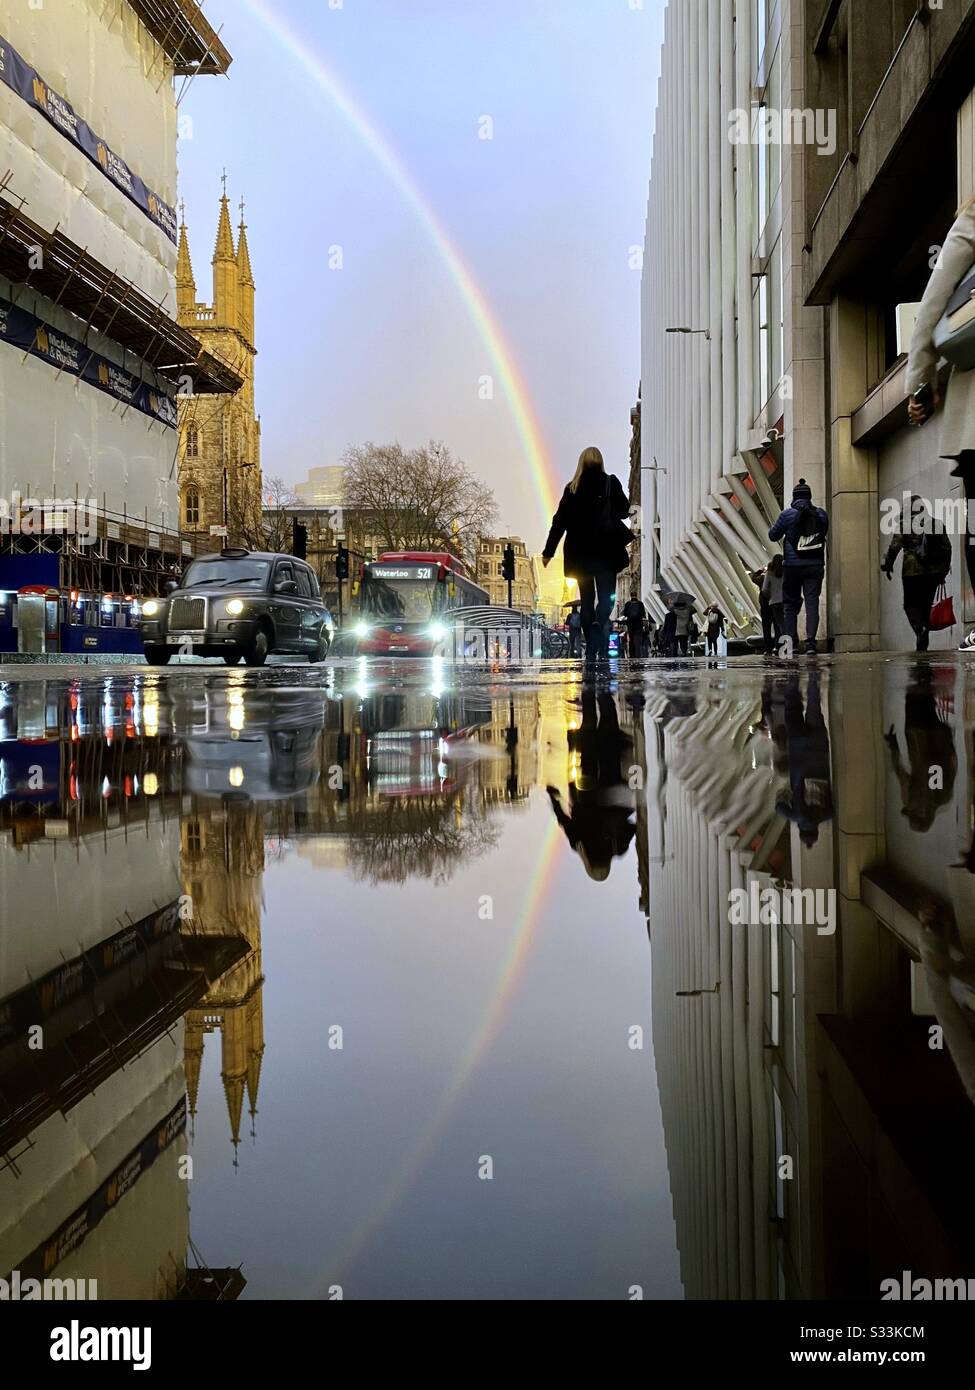 UK Weather: A rainbow shines over the Walkie Talkie building, as it is reflected on a rainy street in Holborn Viaduct, London, England. Stock Photo